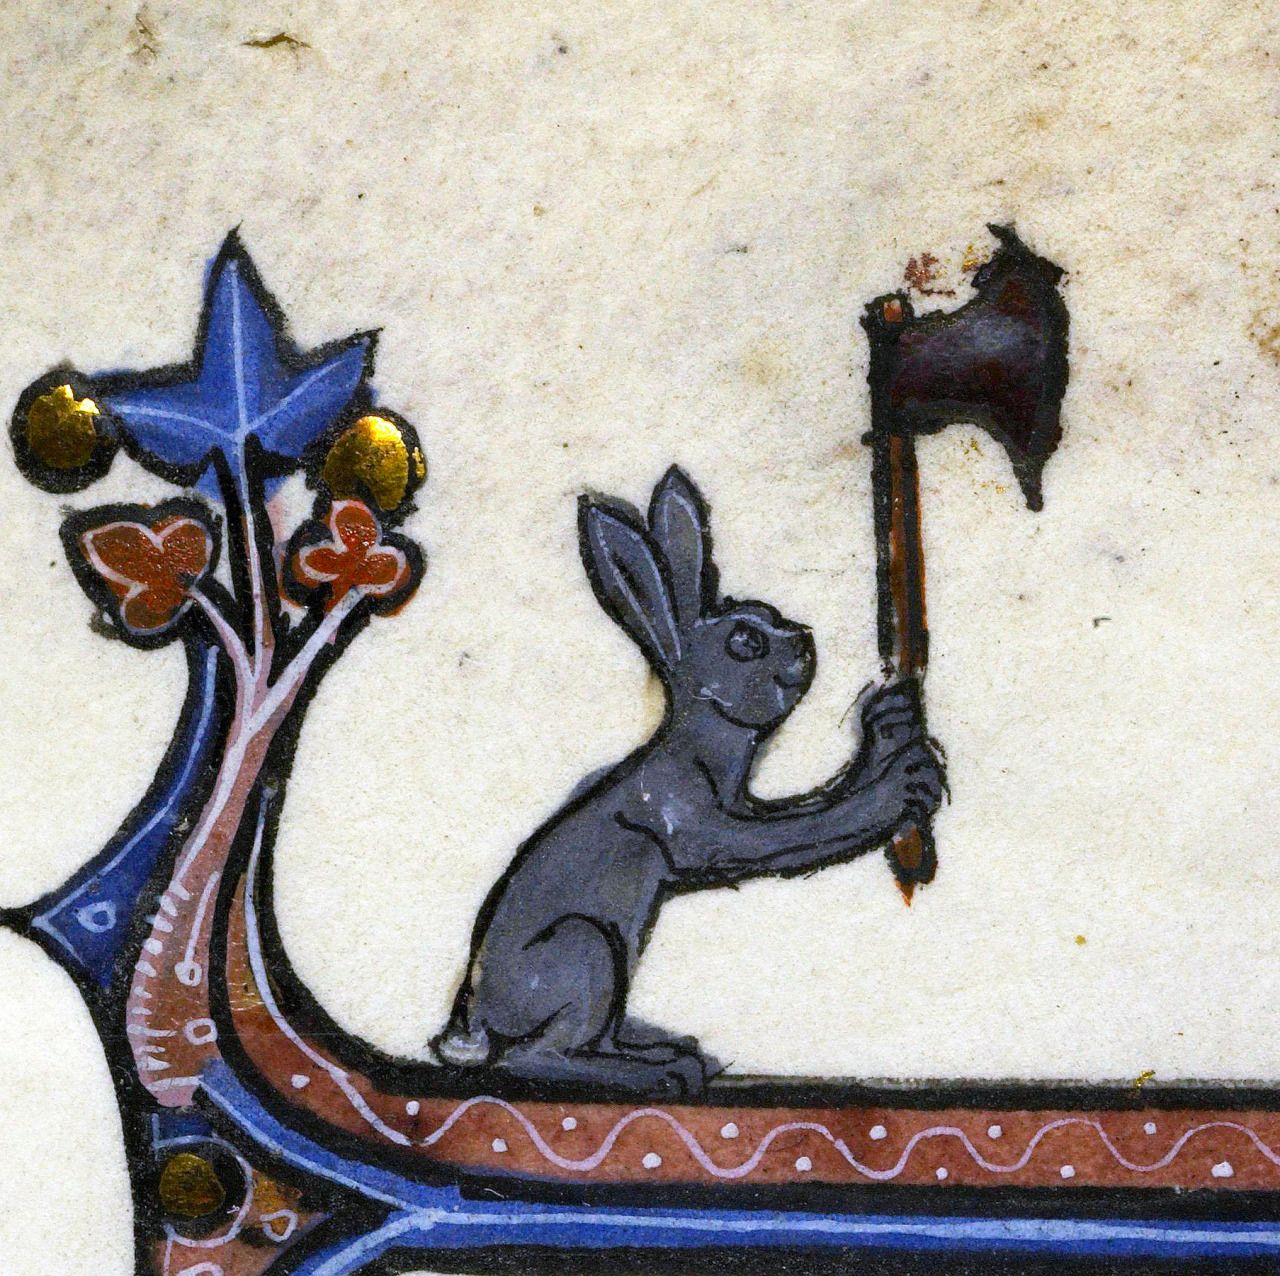 The Psychotic Killer Bunny with an Axe by Unknown Artist - 14th century Bibliothèque Interuniversitaire de la Sorbonne